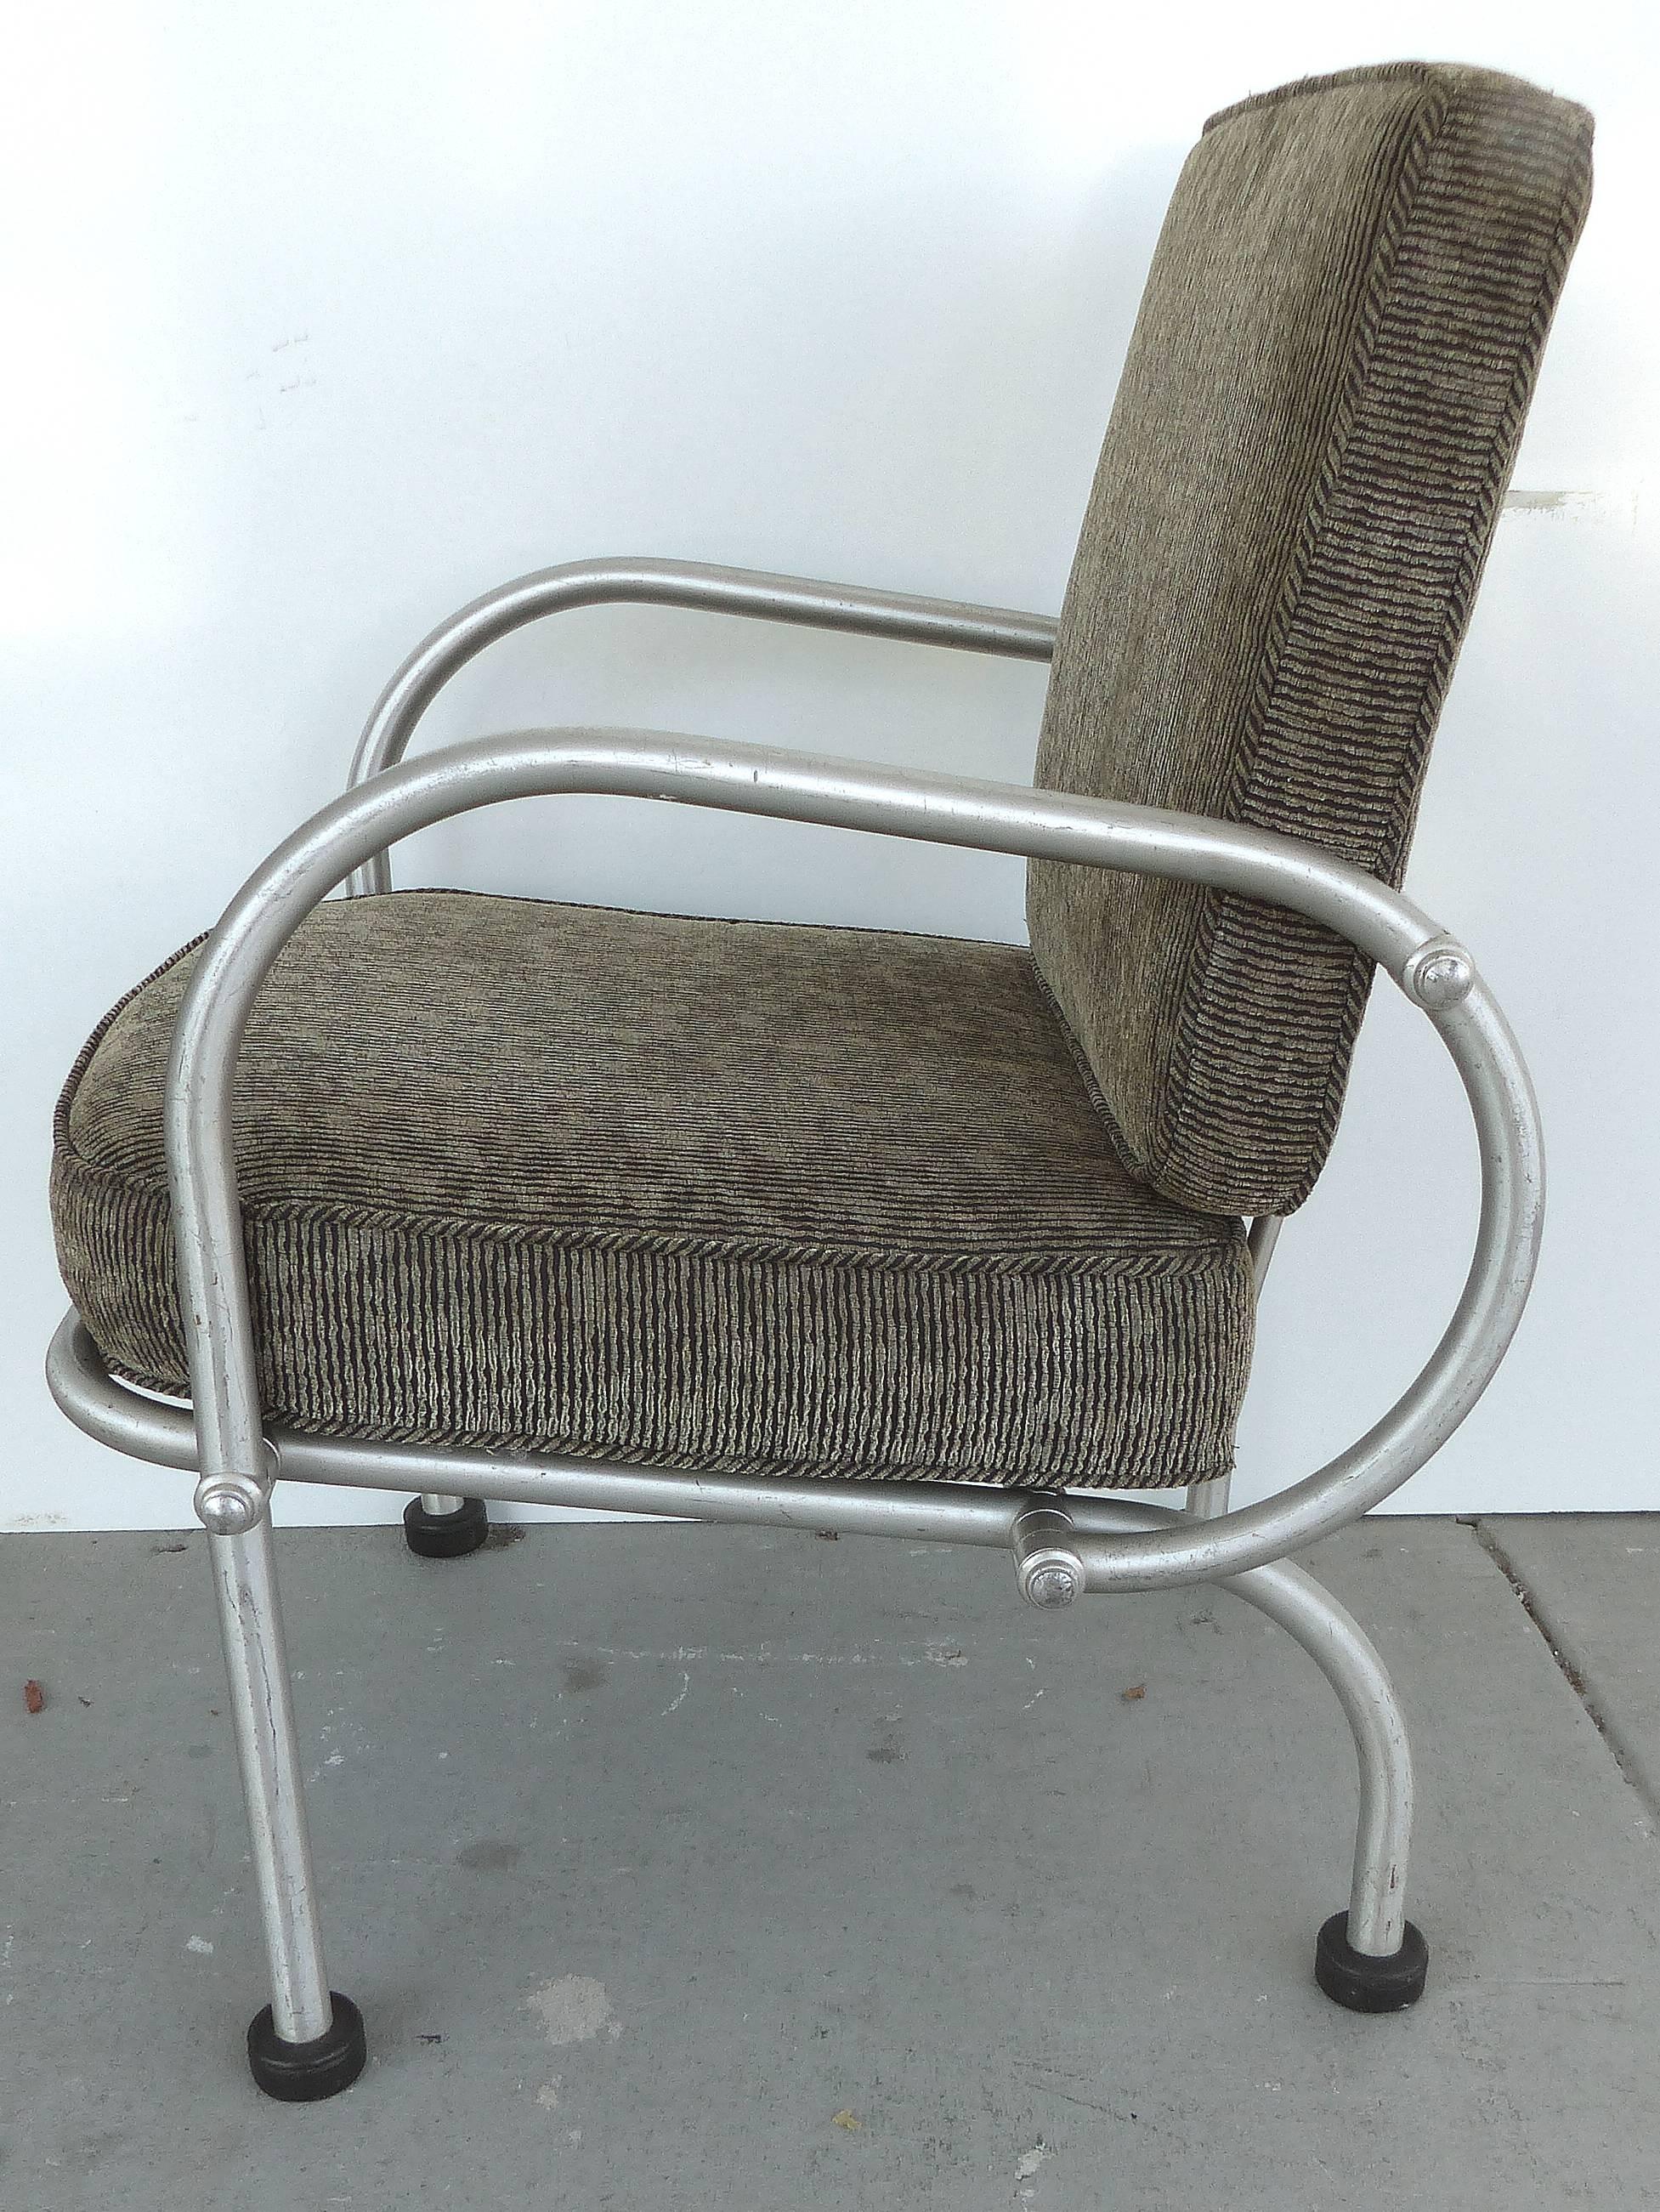 A comfortable American Art Deco armchair designed by Warren McArthur (1885-1961) for the Phoenix Arizona Biltmore Hotel in 1933. Constructed of aluminium tubing anodized by McArthur’s process, the chair has the original rubber feet and upholstered